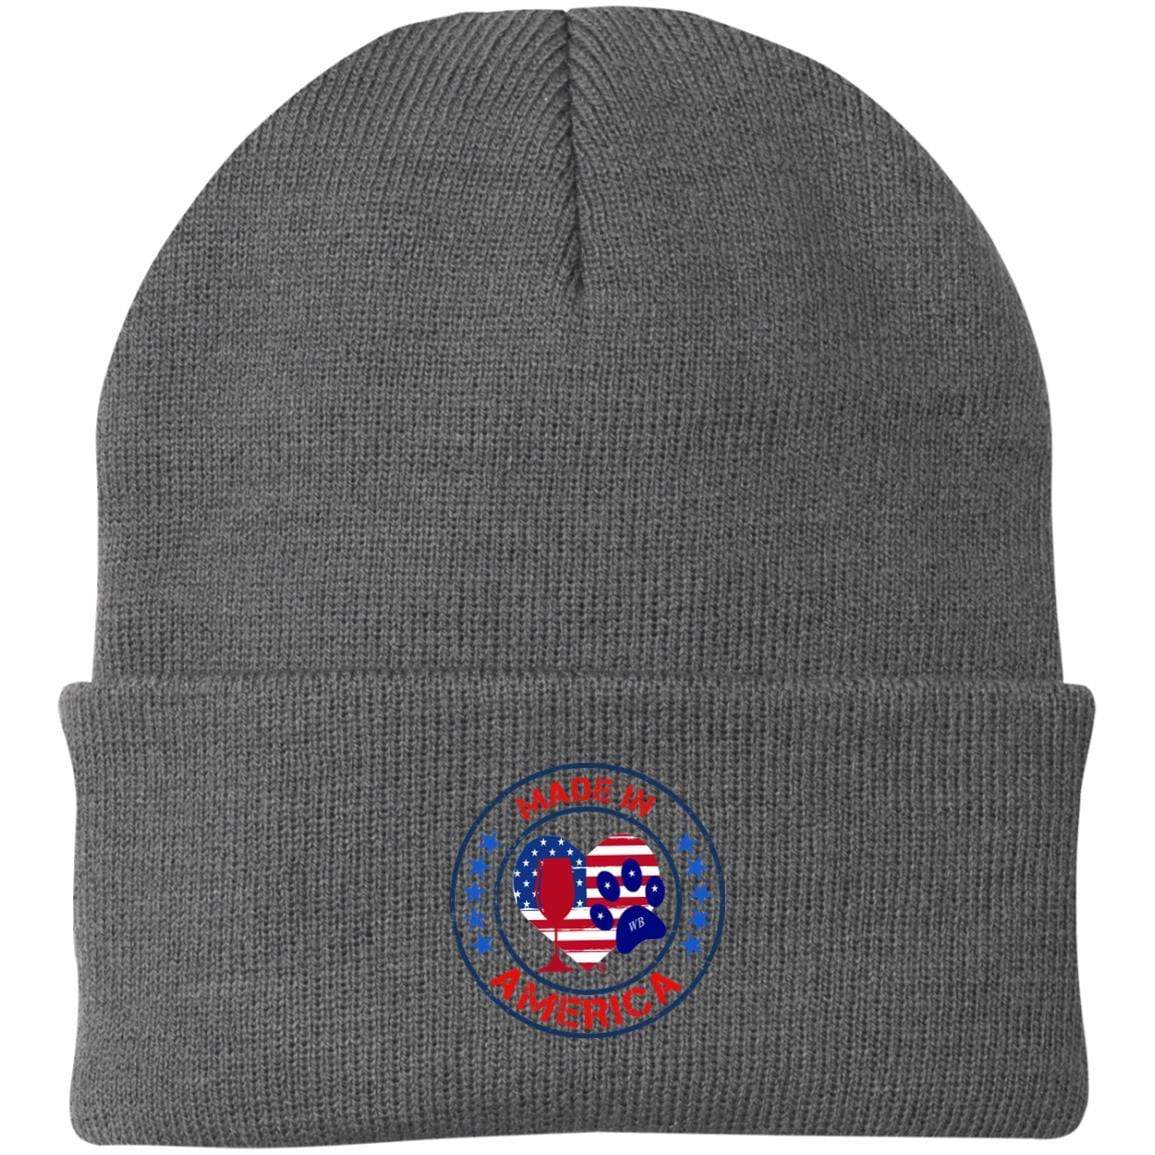 Hats Athletic Oxford / One Size Winey Bitches Co "Made In America" Embroidered Knit Cap WineyBitchesCo